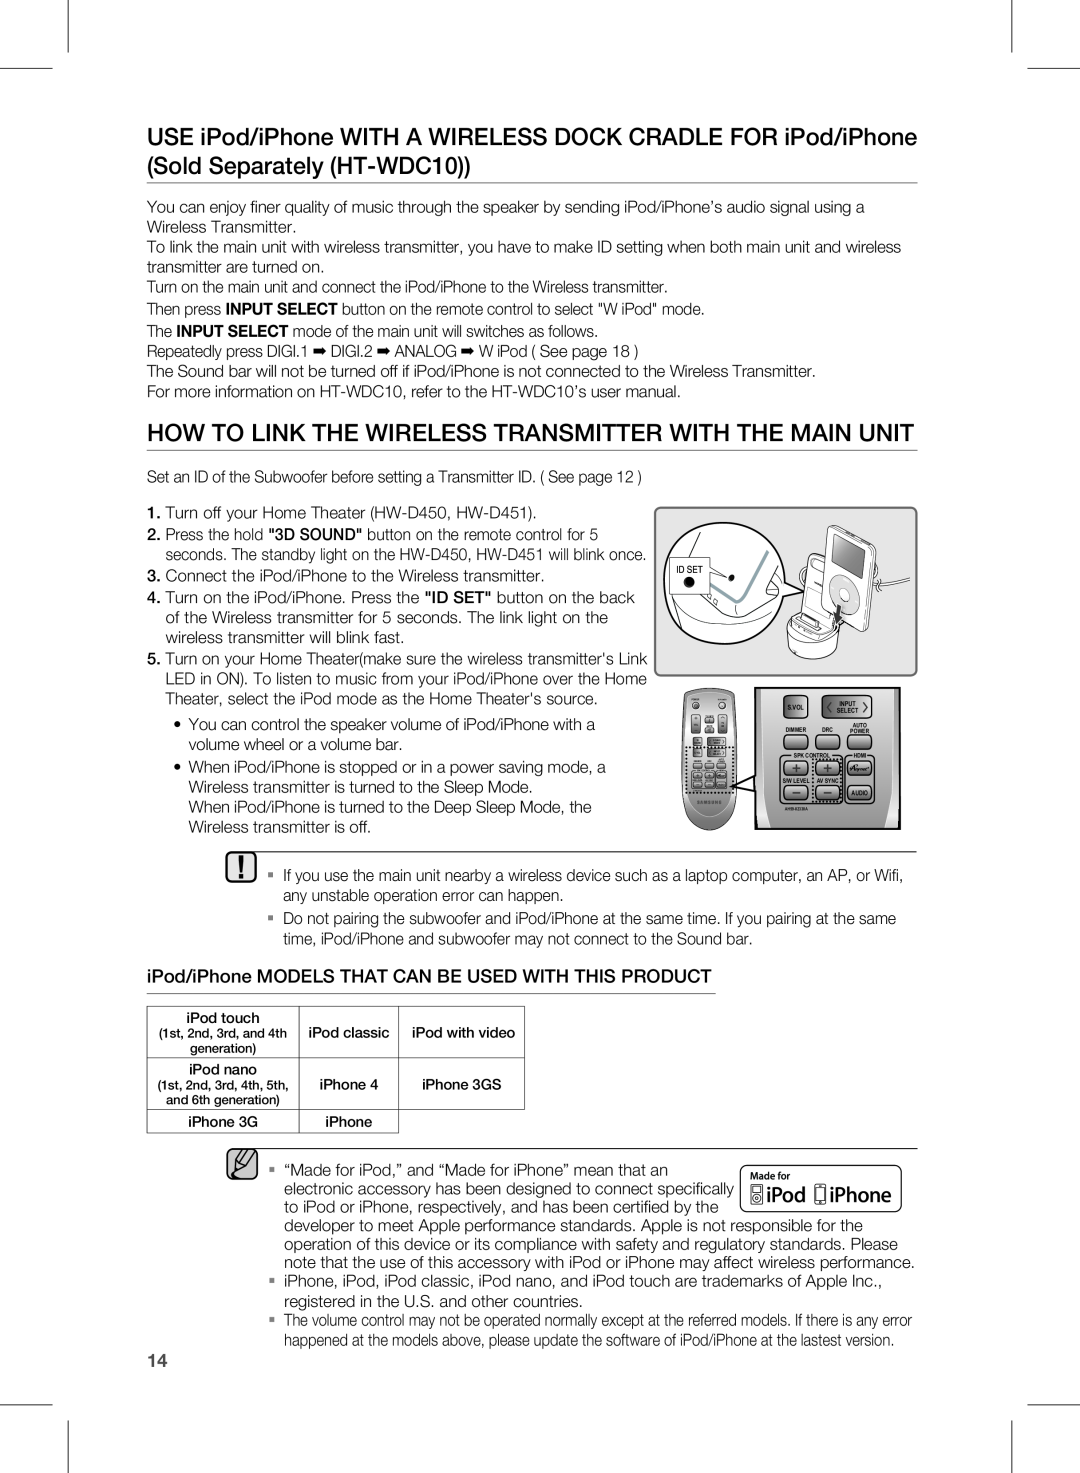 Samsung user manual Turn off your Home Theater HW-D450, HW-D451 